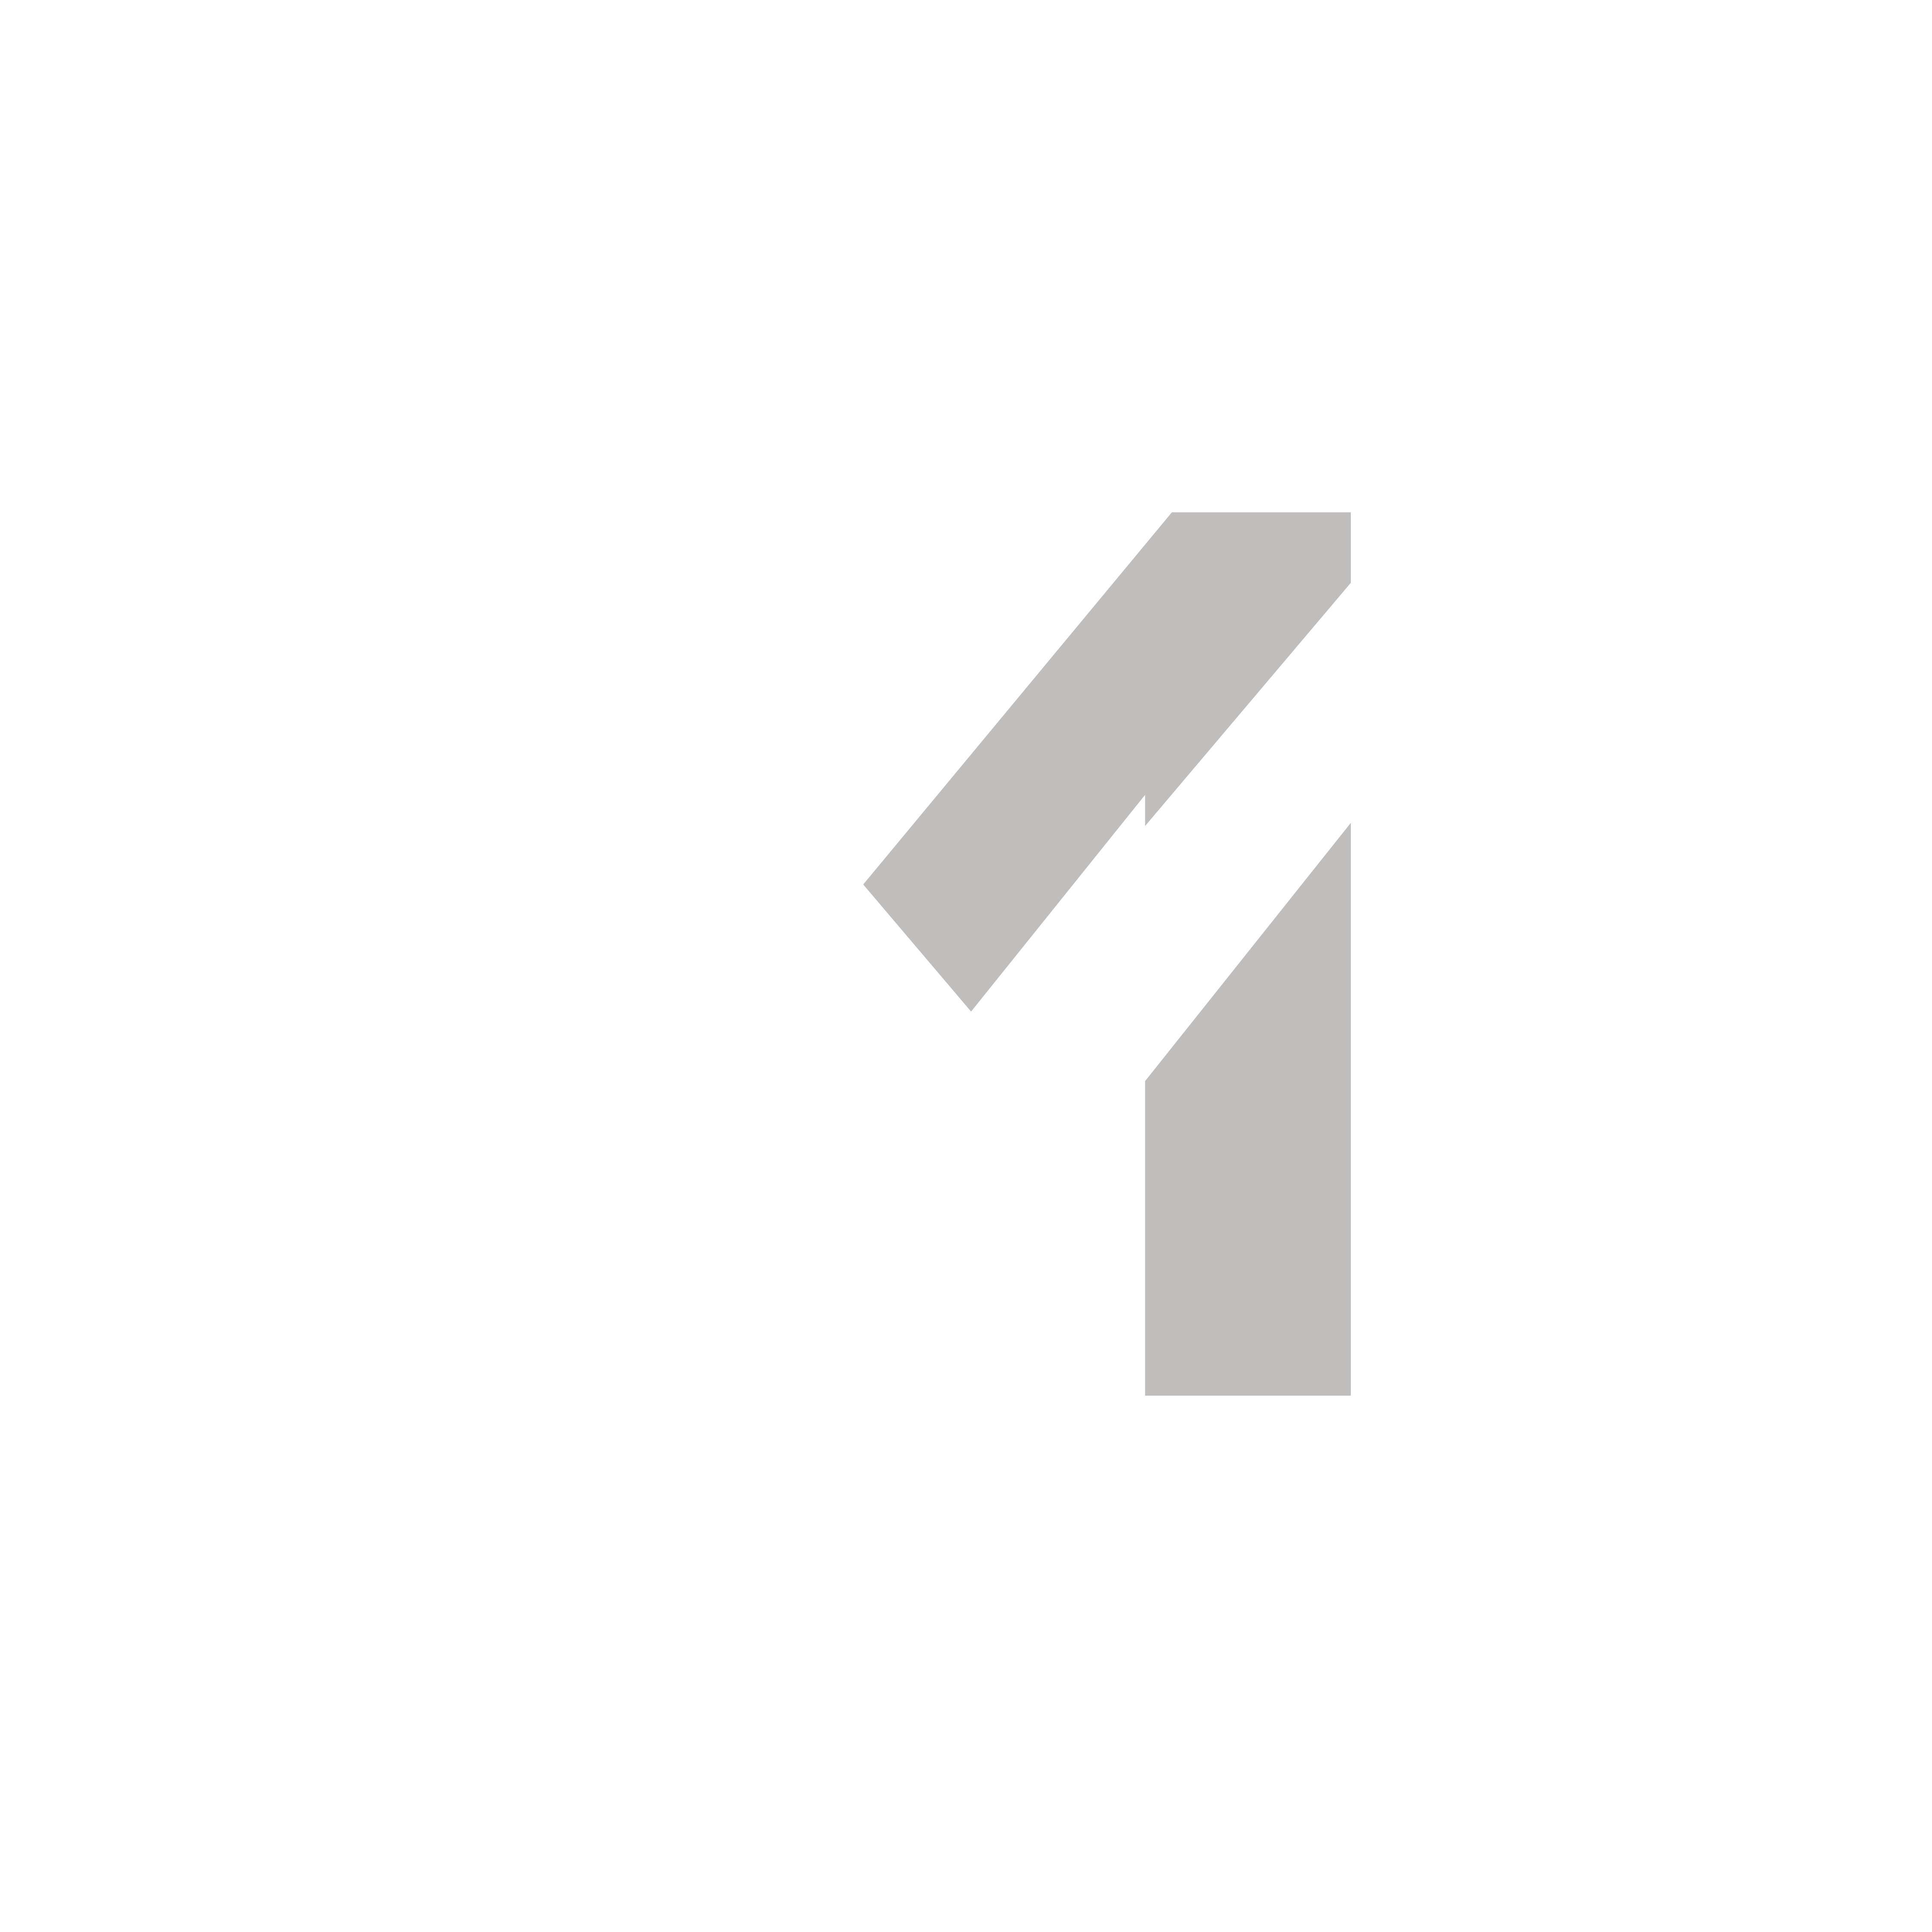 Musclefirst White Logo